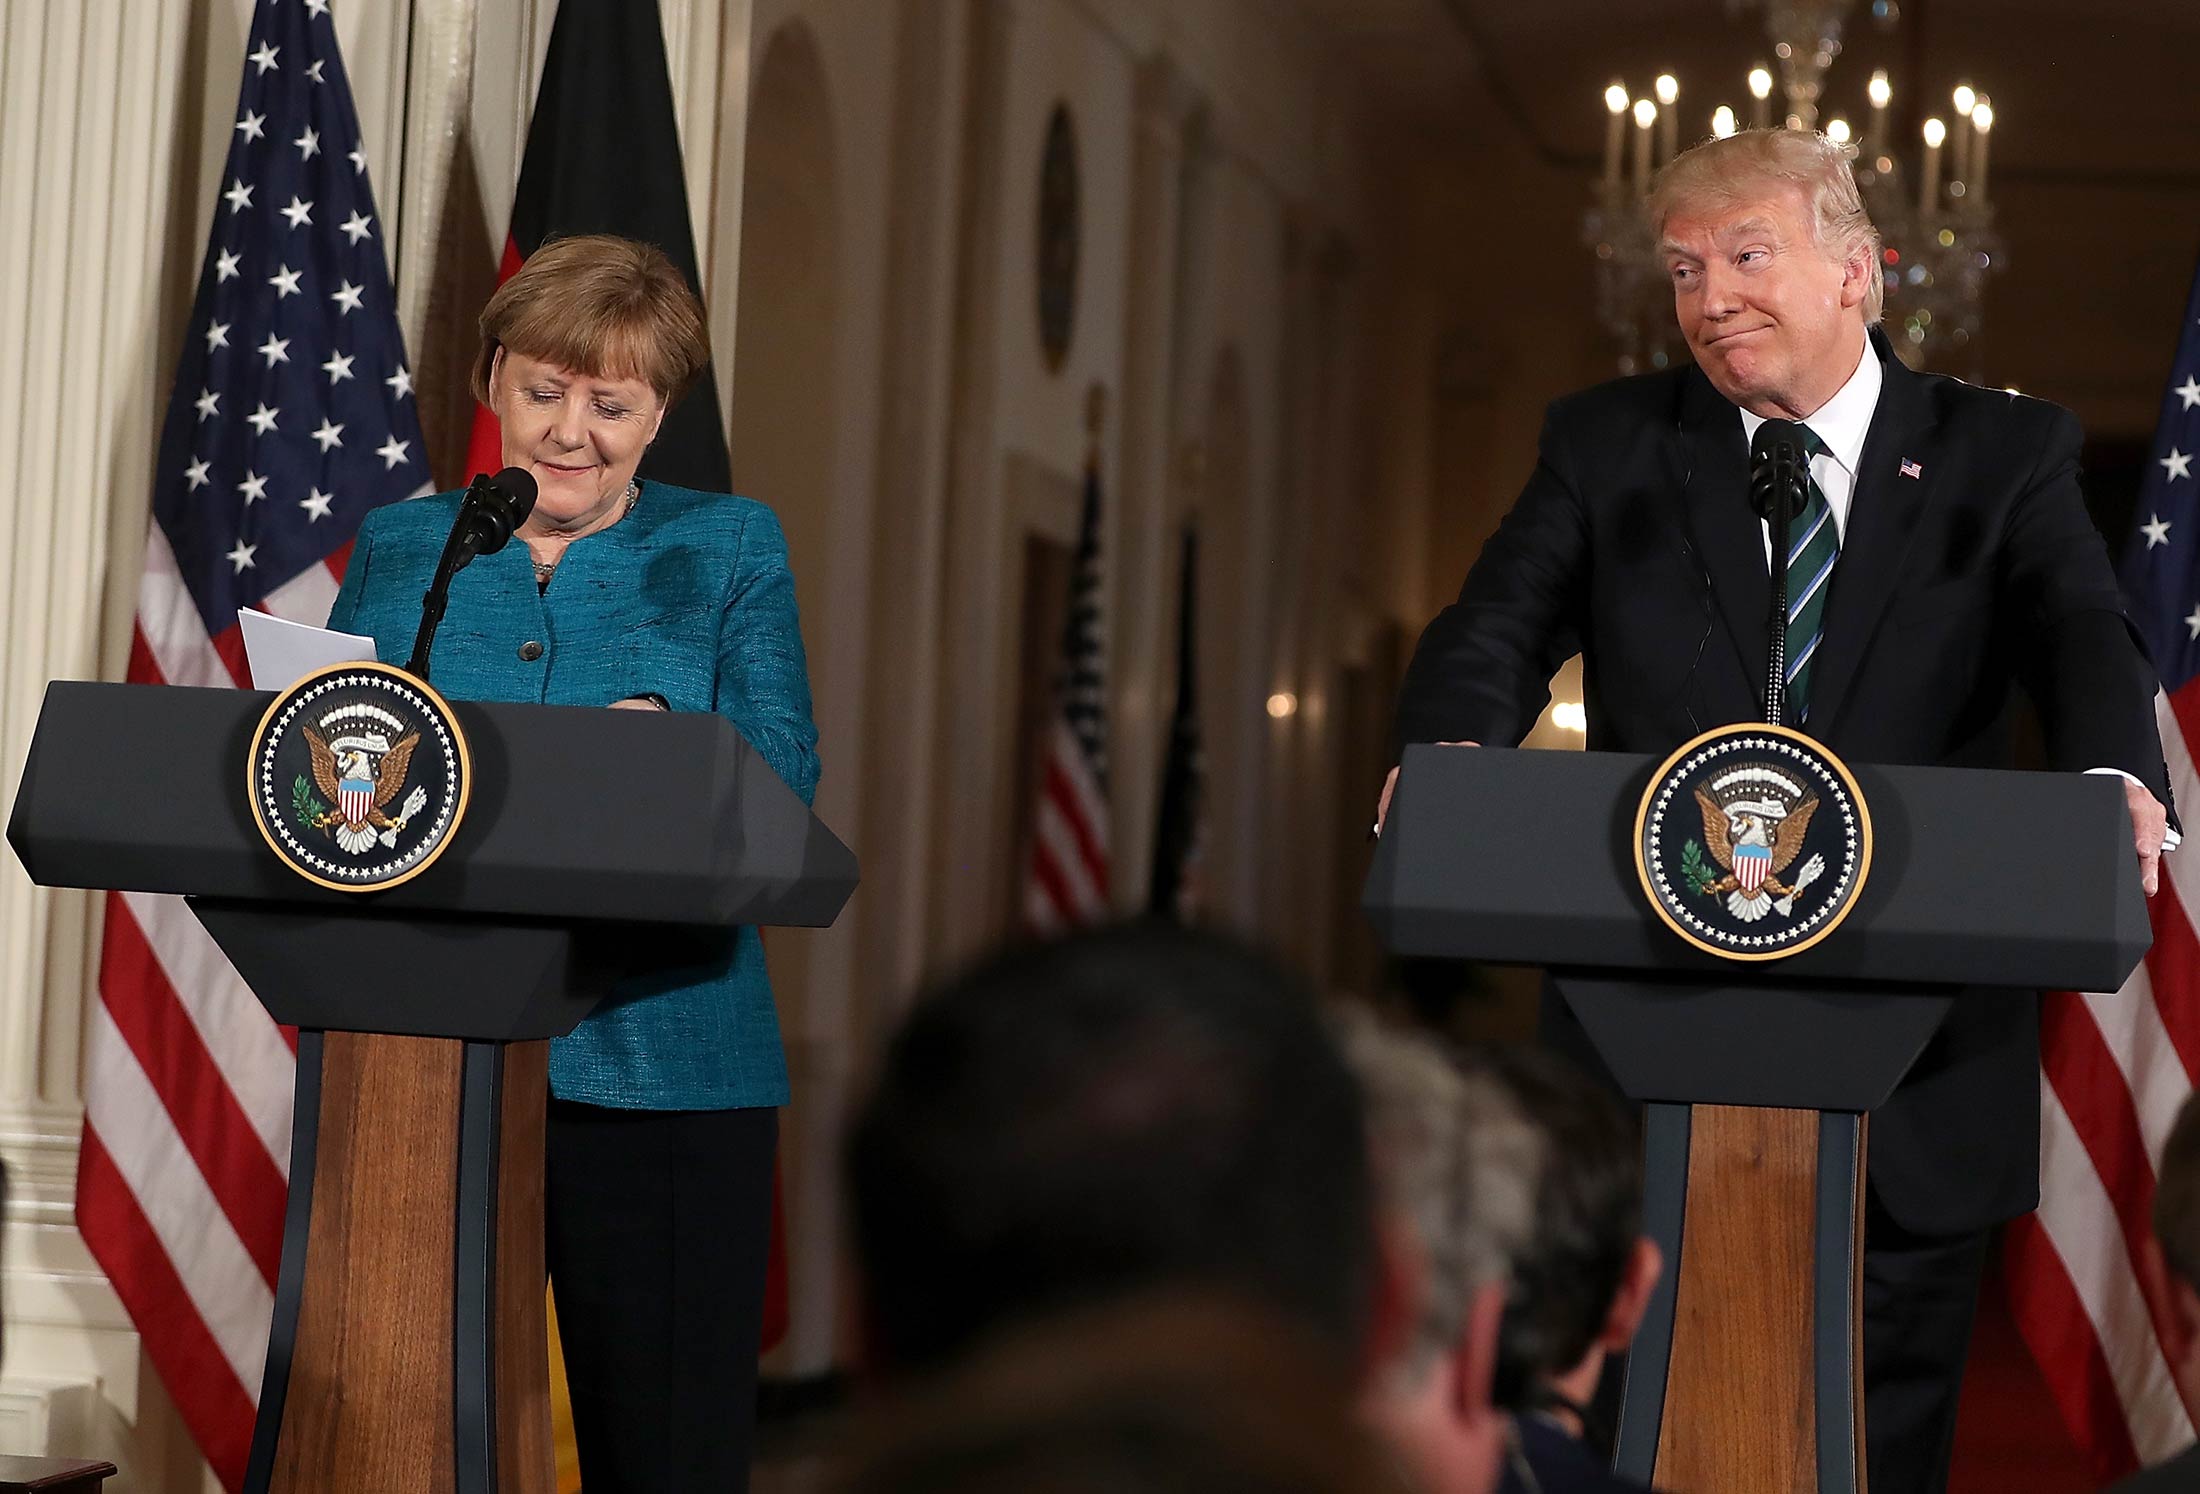 U.S. President Donald Trump holds a joint press conference with German Chancellor Angela Merkel in Washington, D.C. on on March 17, 2017.
